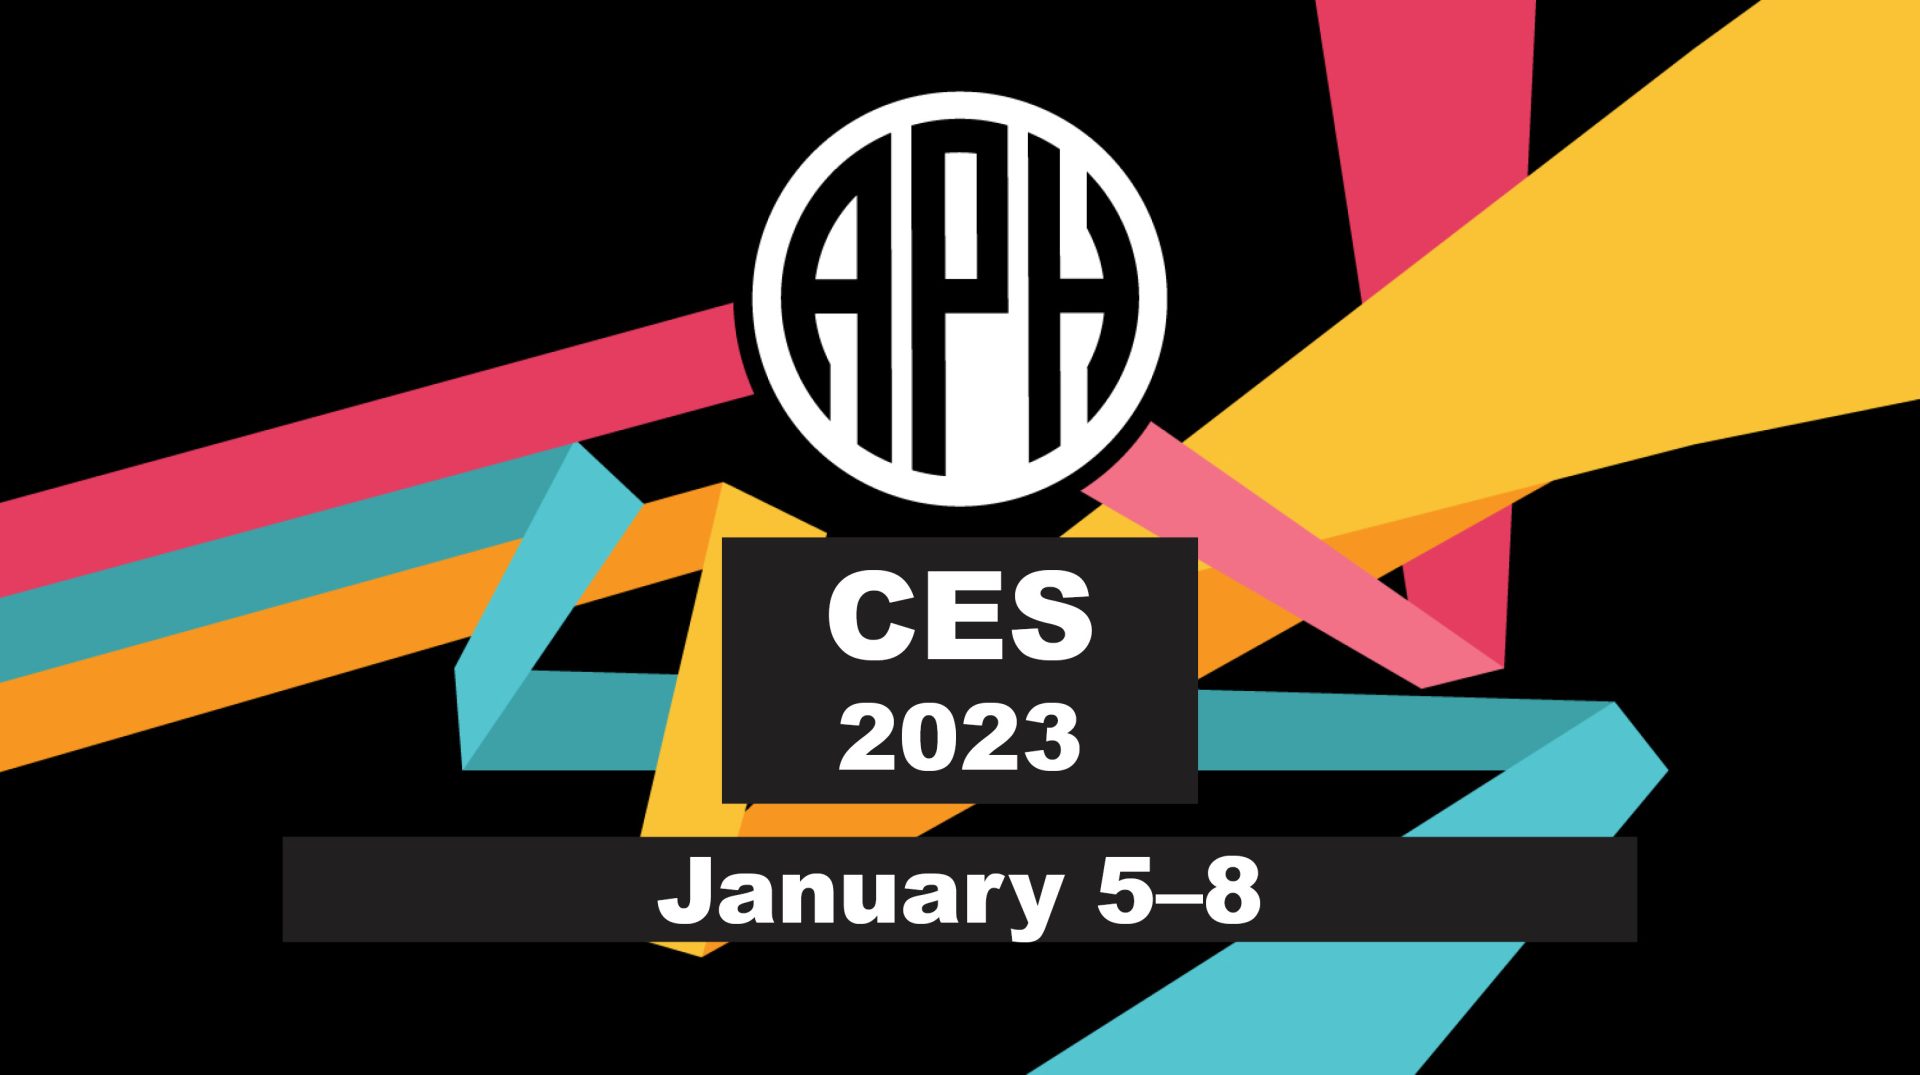 APH event banner. Three parallel bars in the APH brand colors of pomegranate, teal, and gold diverge and zigzag dynamically behind the APH logo. Text reads: CES 2023, January 5 - 8.